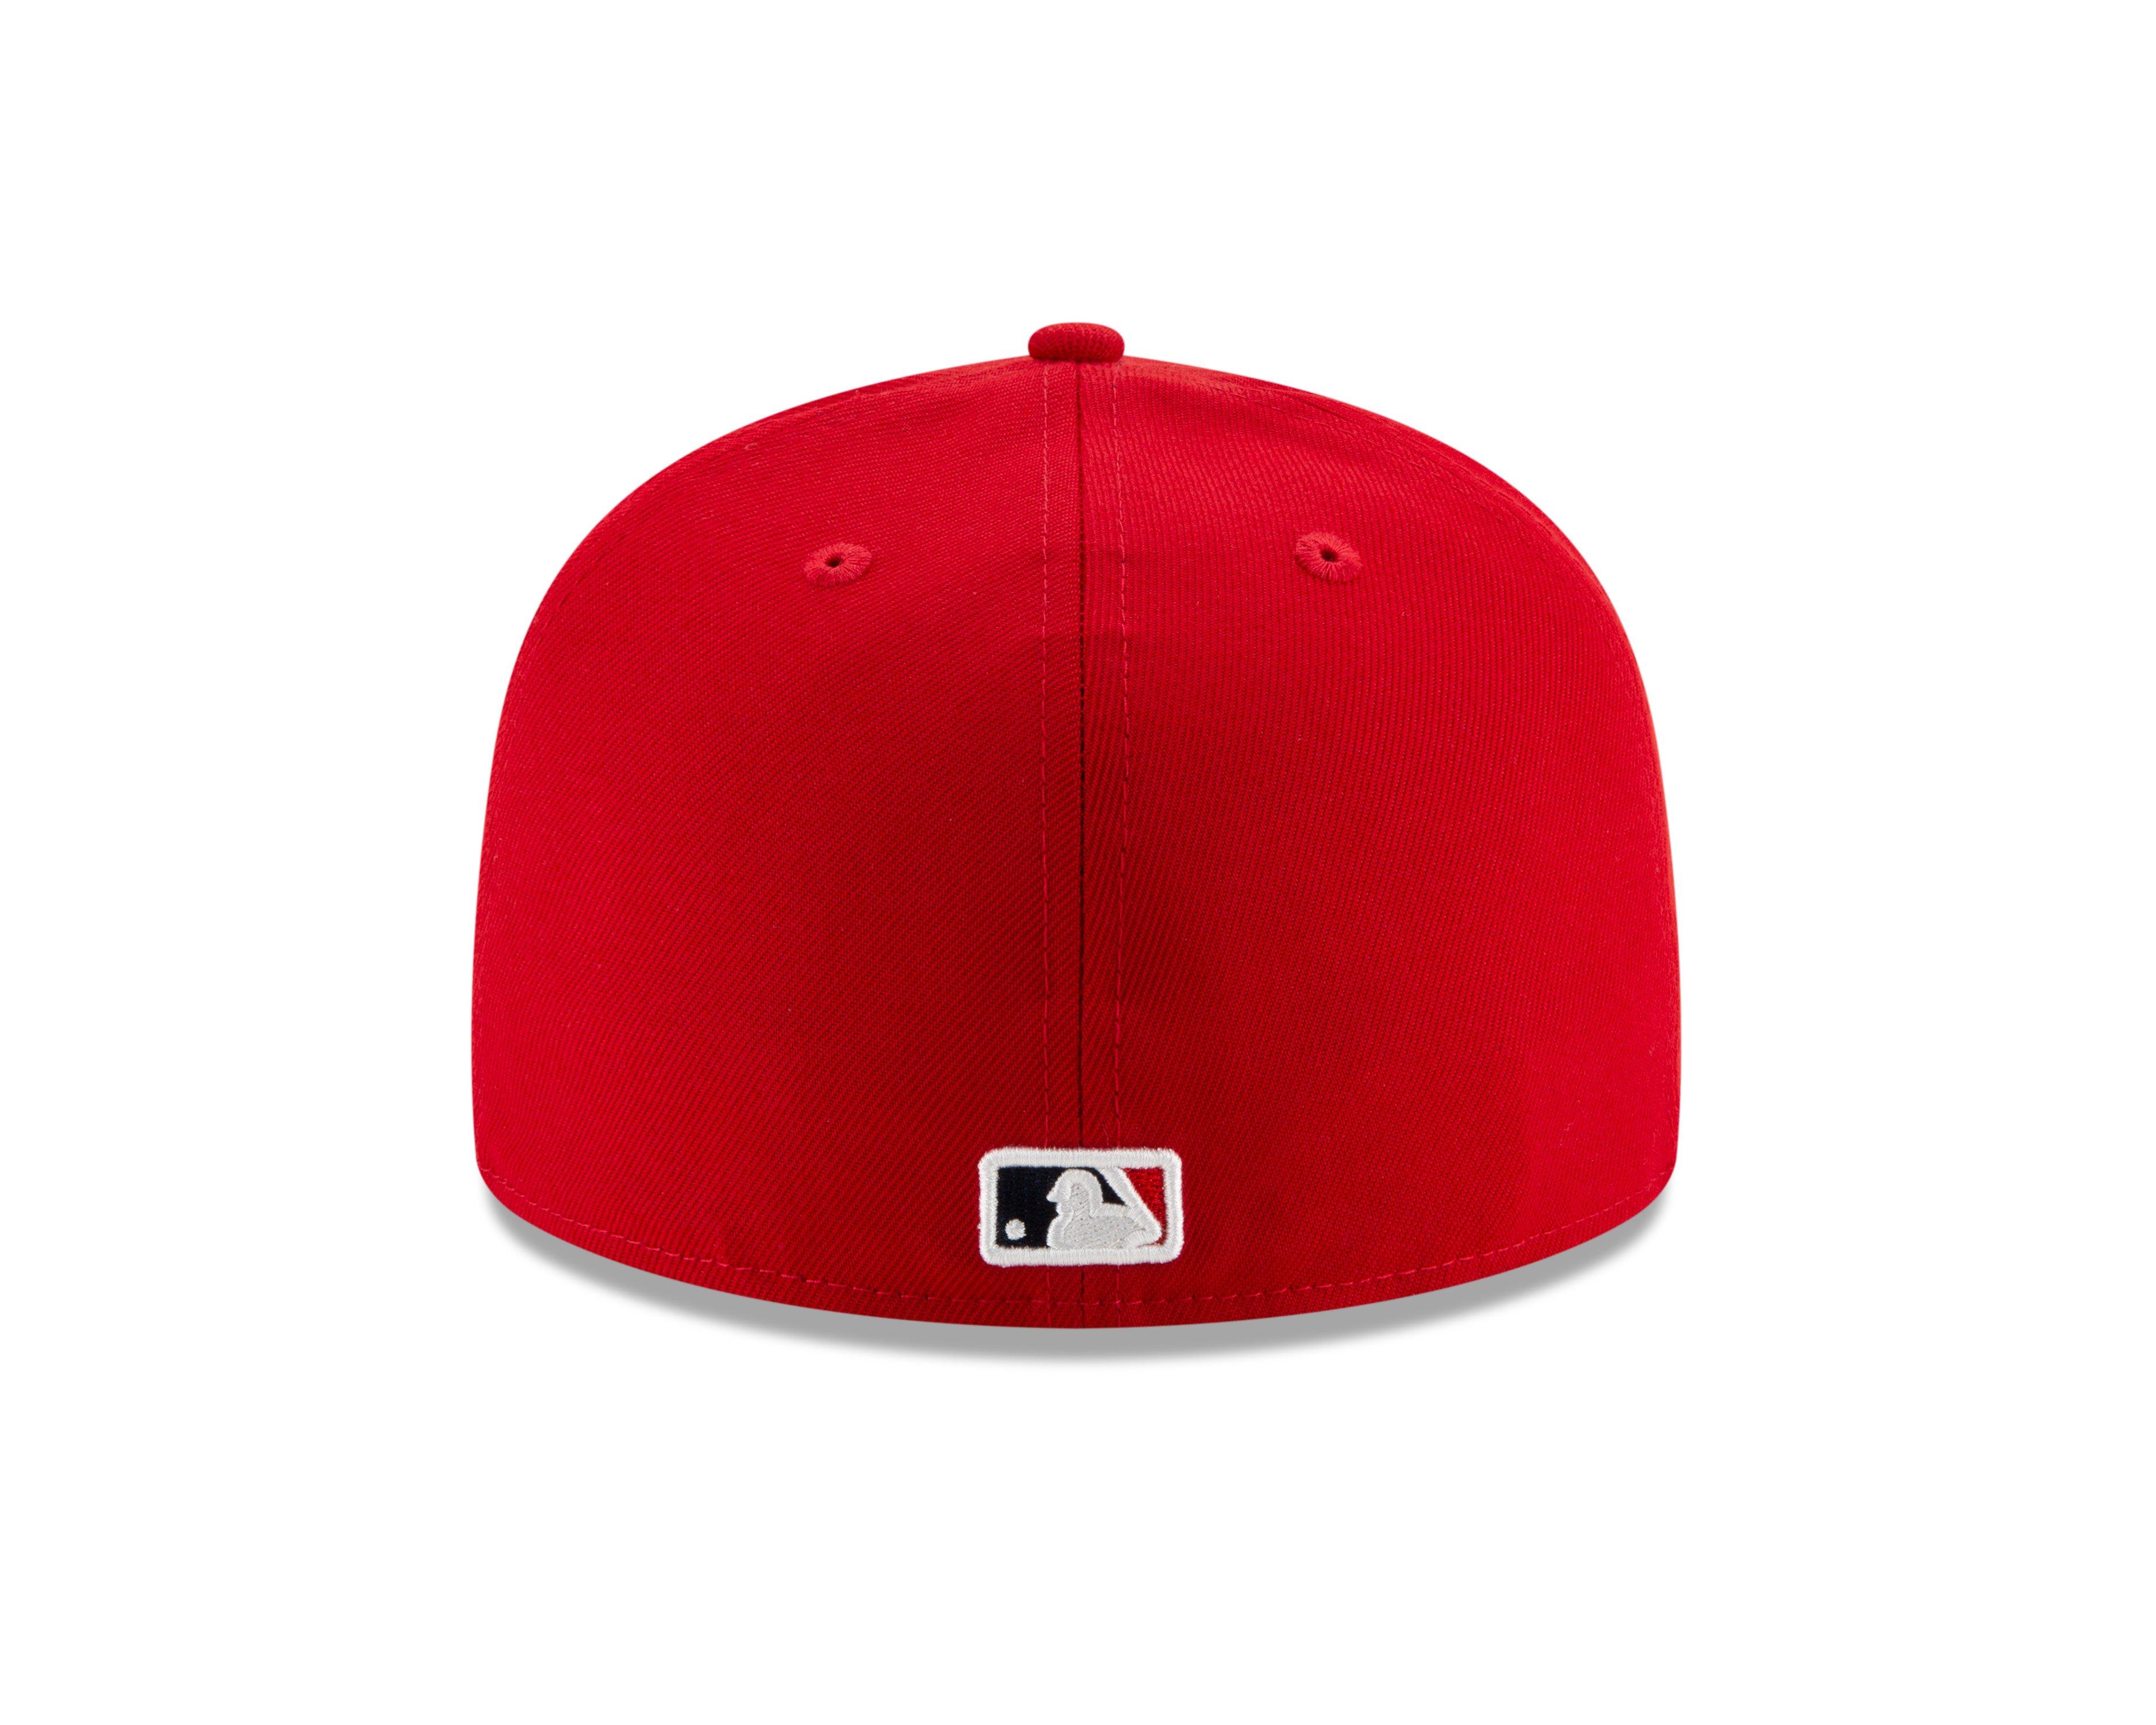 St. Louis Cardinals STL MLB Authentic New Era 59FIFTY Fitted Cap - 5950 Hat  - Houston Real Estate